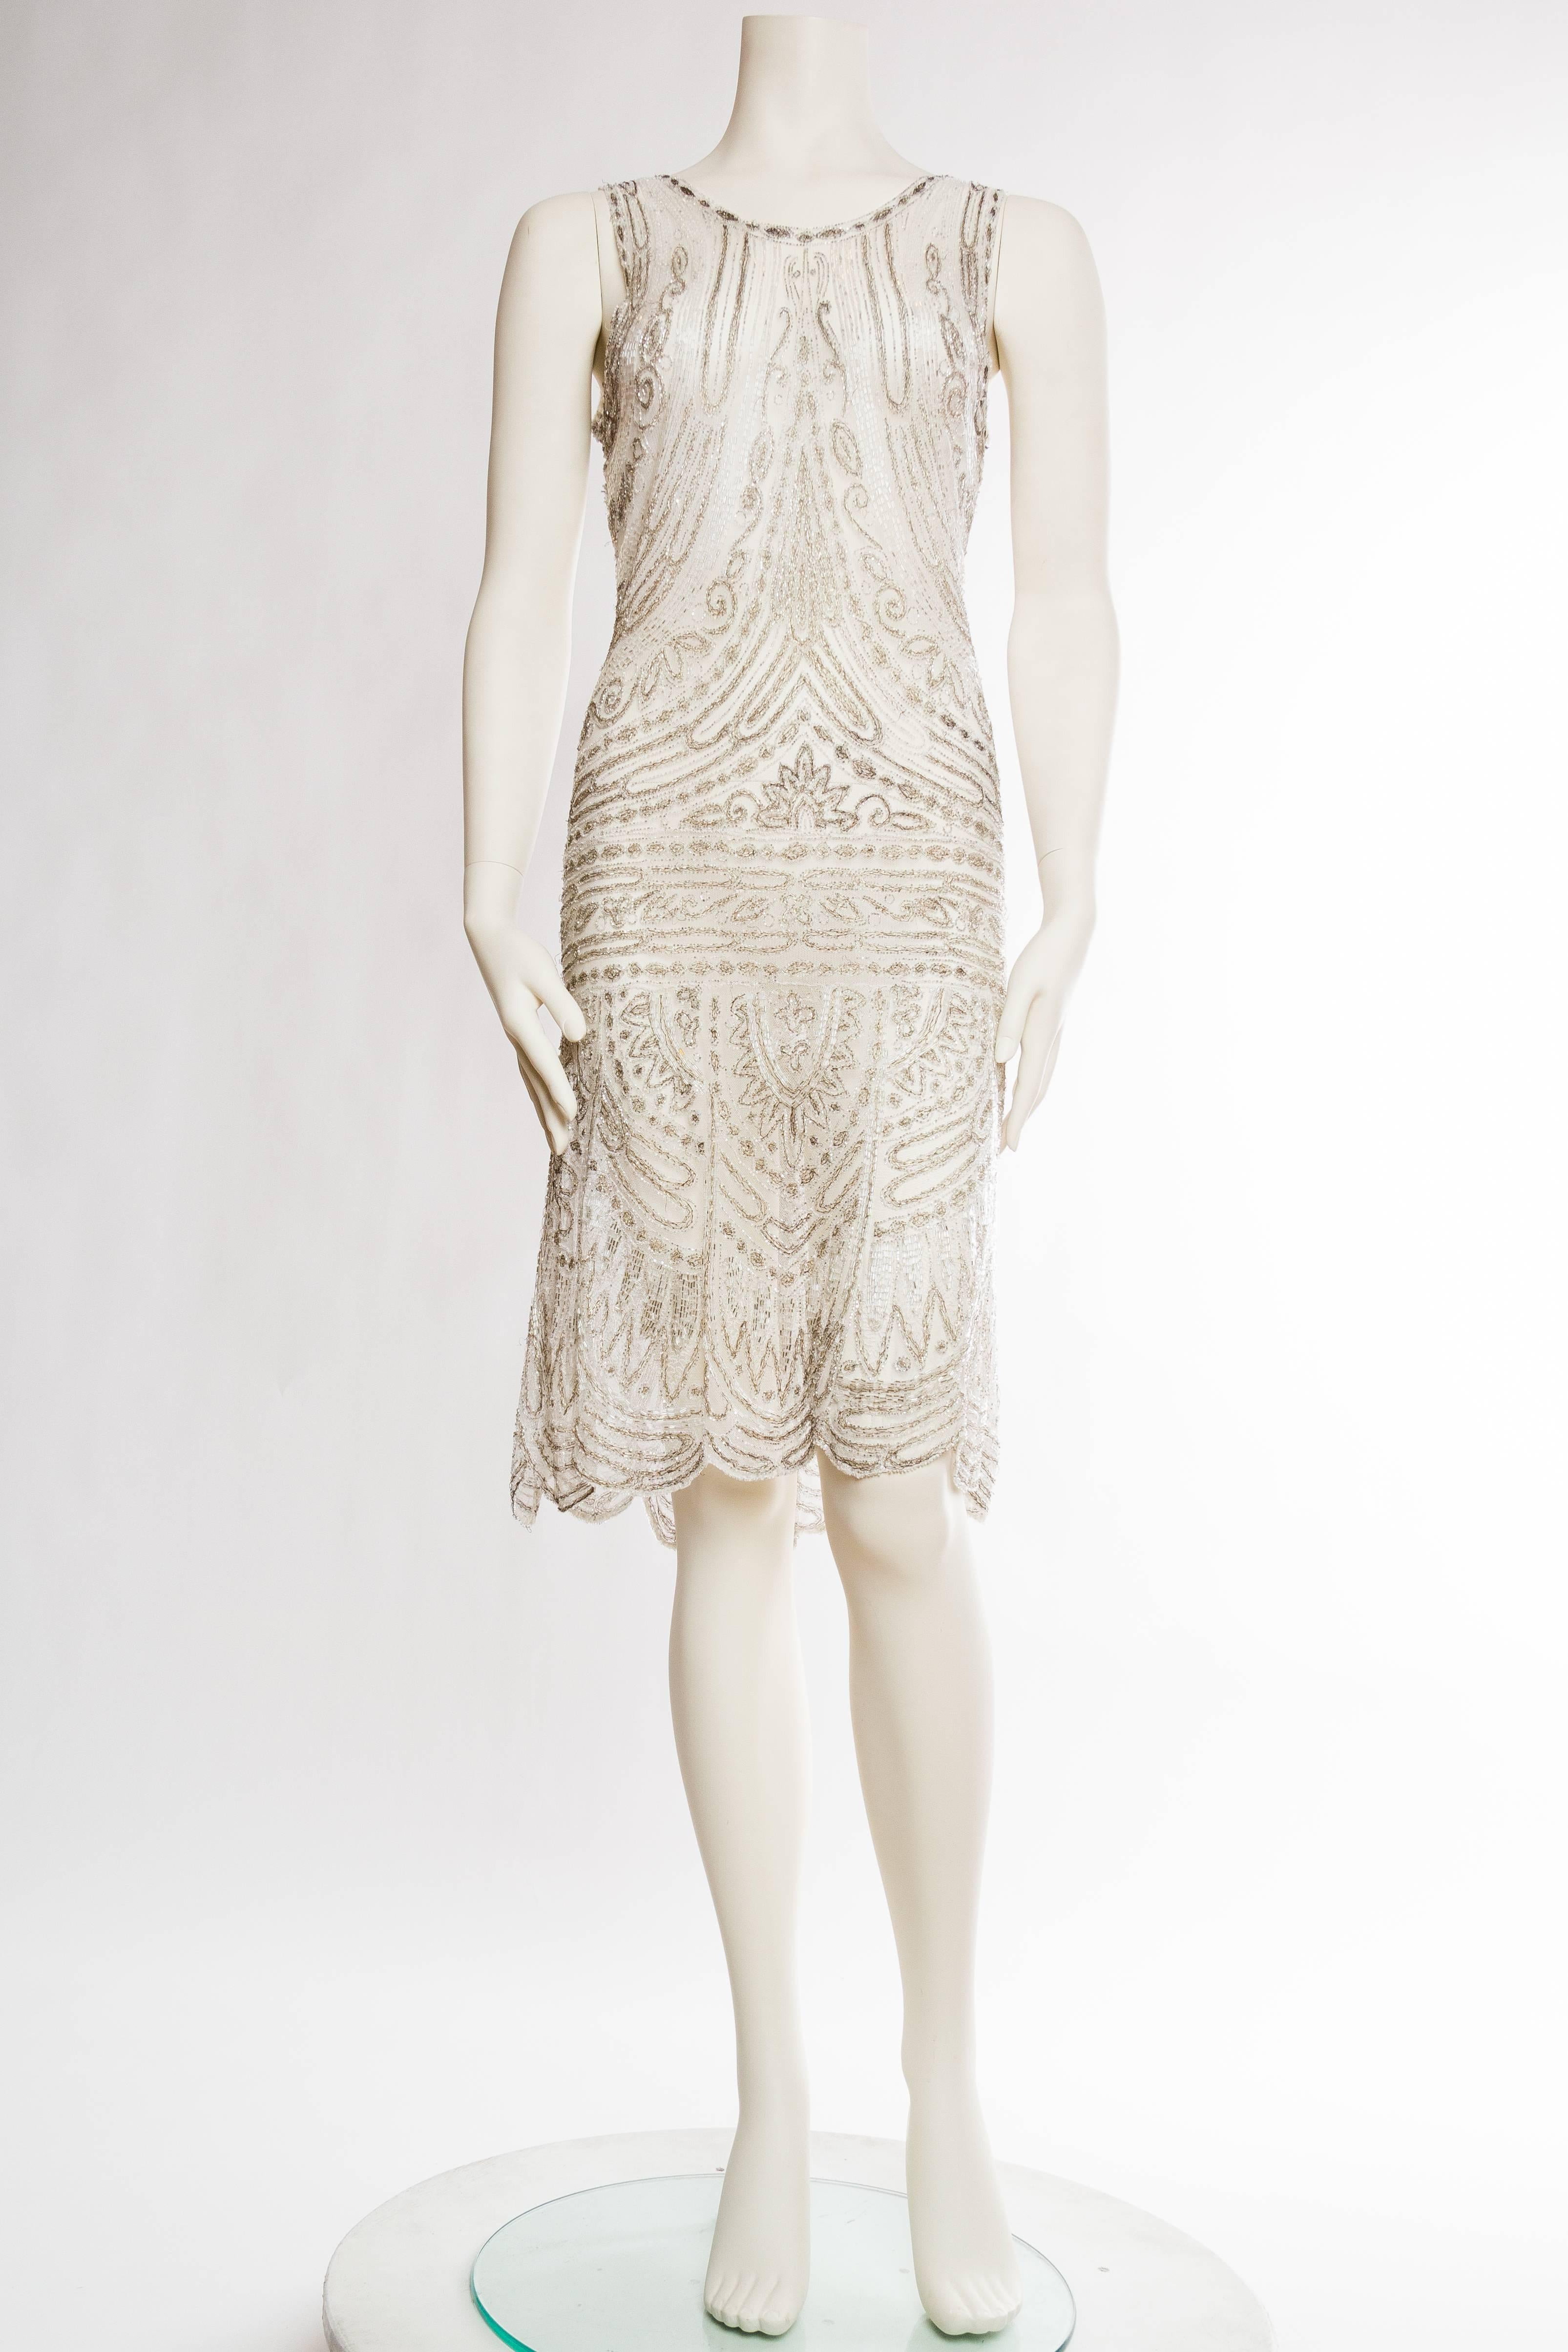 Beige 1920s Beaded Net Dress Embroidered with Silver Threads